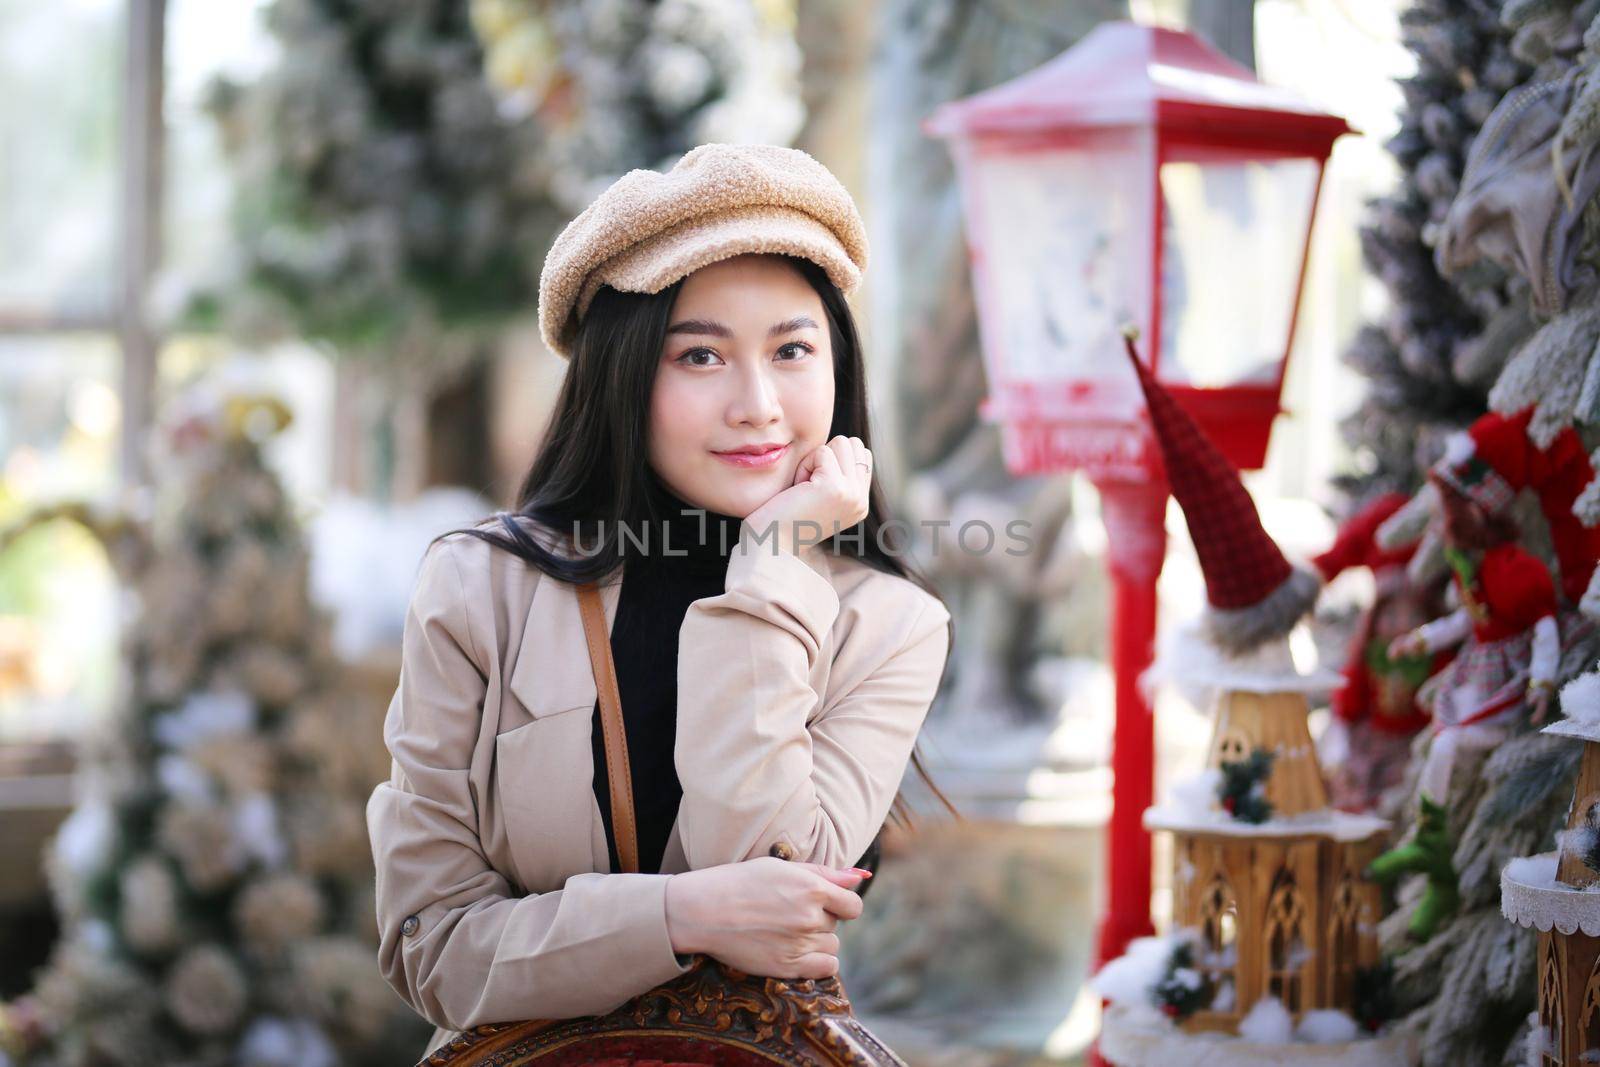  Portrait of young beautiful woman in winter clothes. while posing on snow background. Outdoor close-up photo of female model with romantic smile chilling in park in winter.